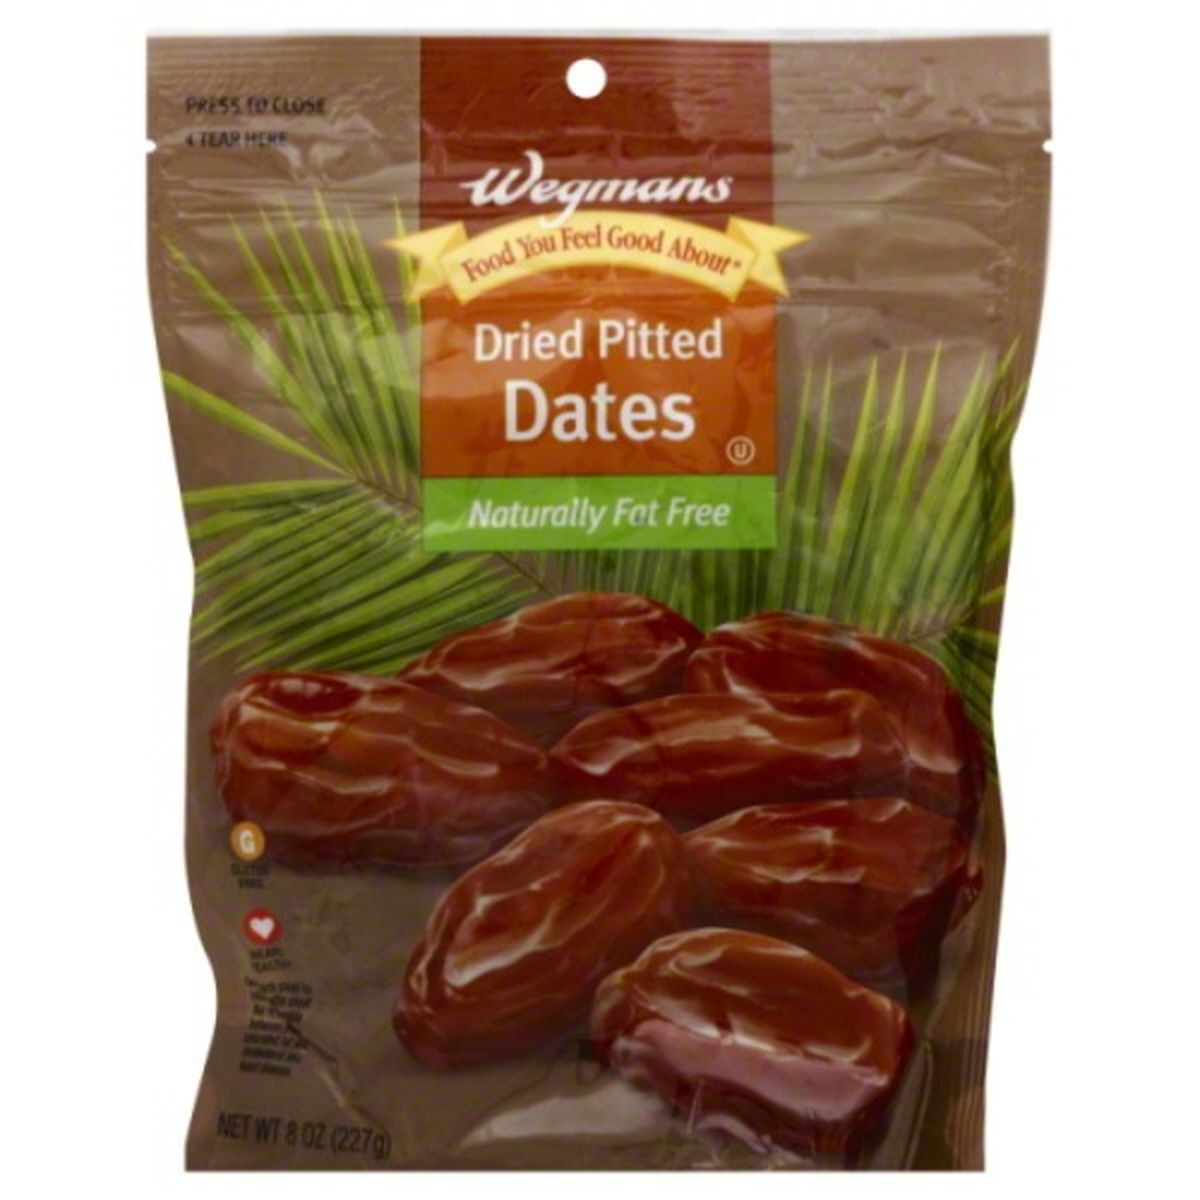 Calories in Wegmans Dried Pitted Dates